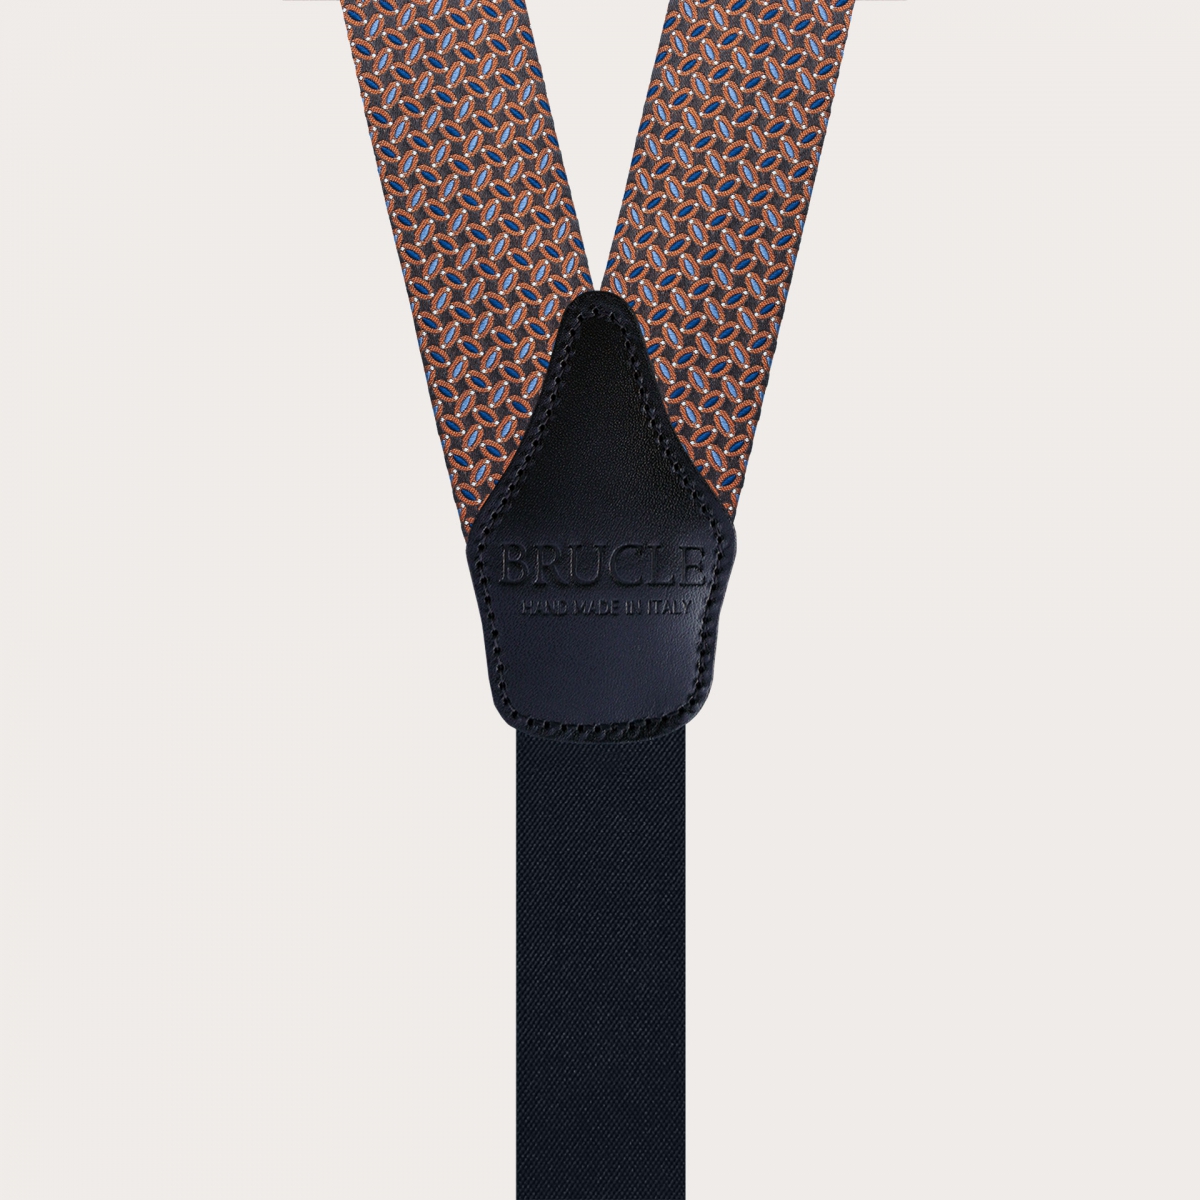 Silk suspenders braid ends with a micro-pattern in brown, light blue, blue, and orange